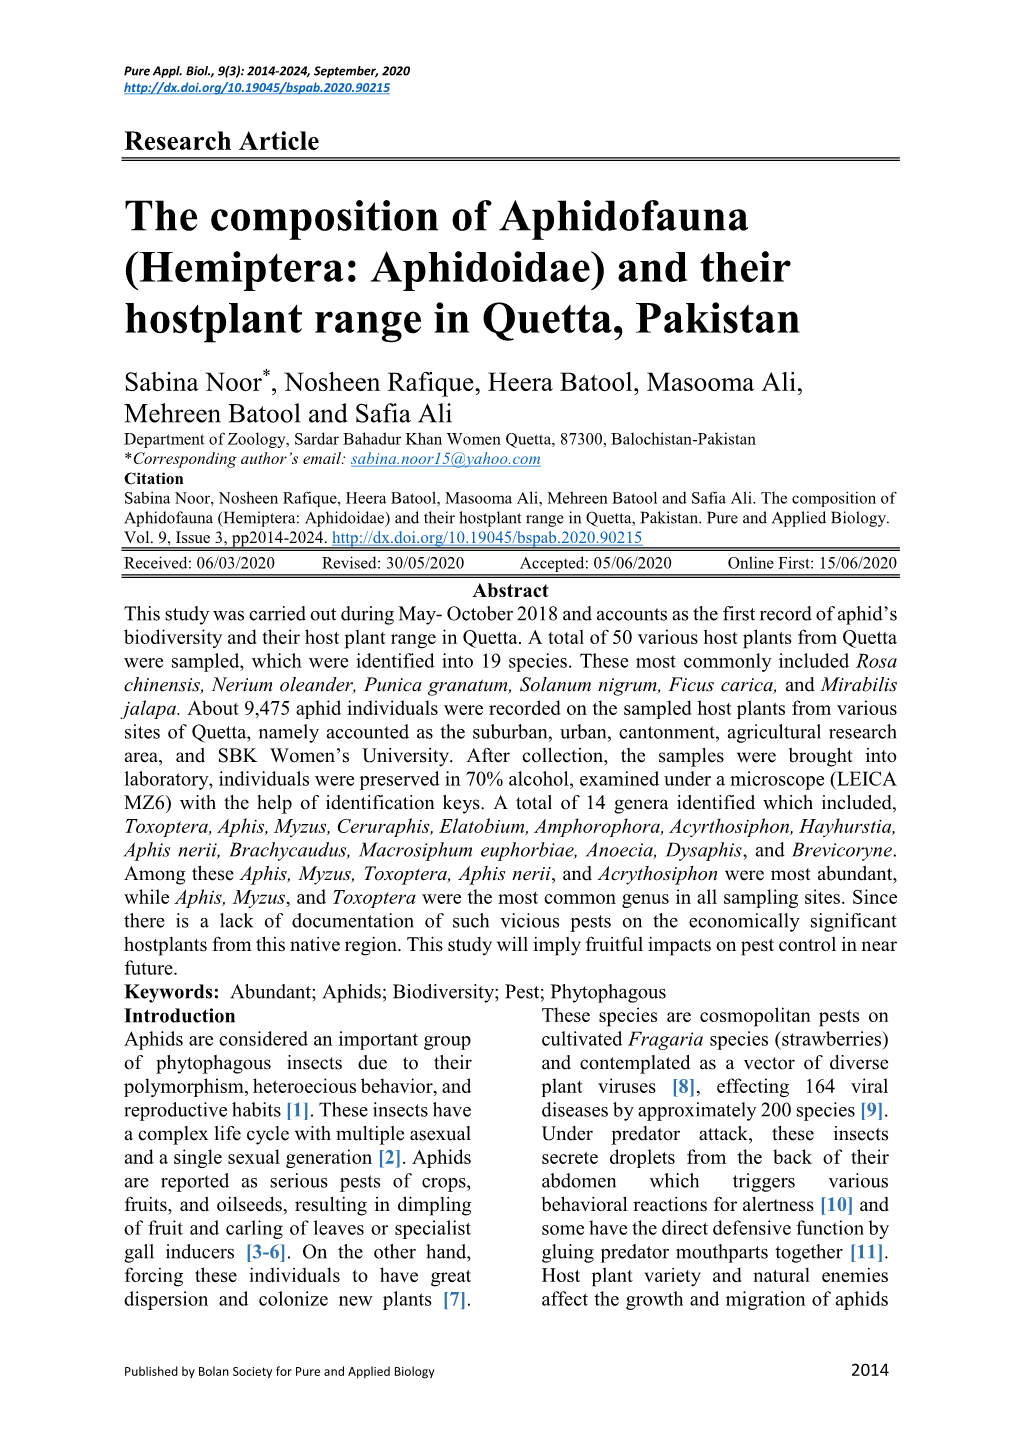 The Composition of Aphidofauna (Hemiptera: Aphidoidae) and Their Hostplant Range in Quetta, Pakistan